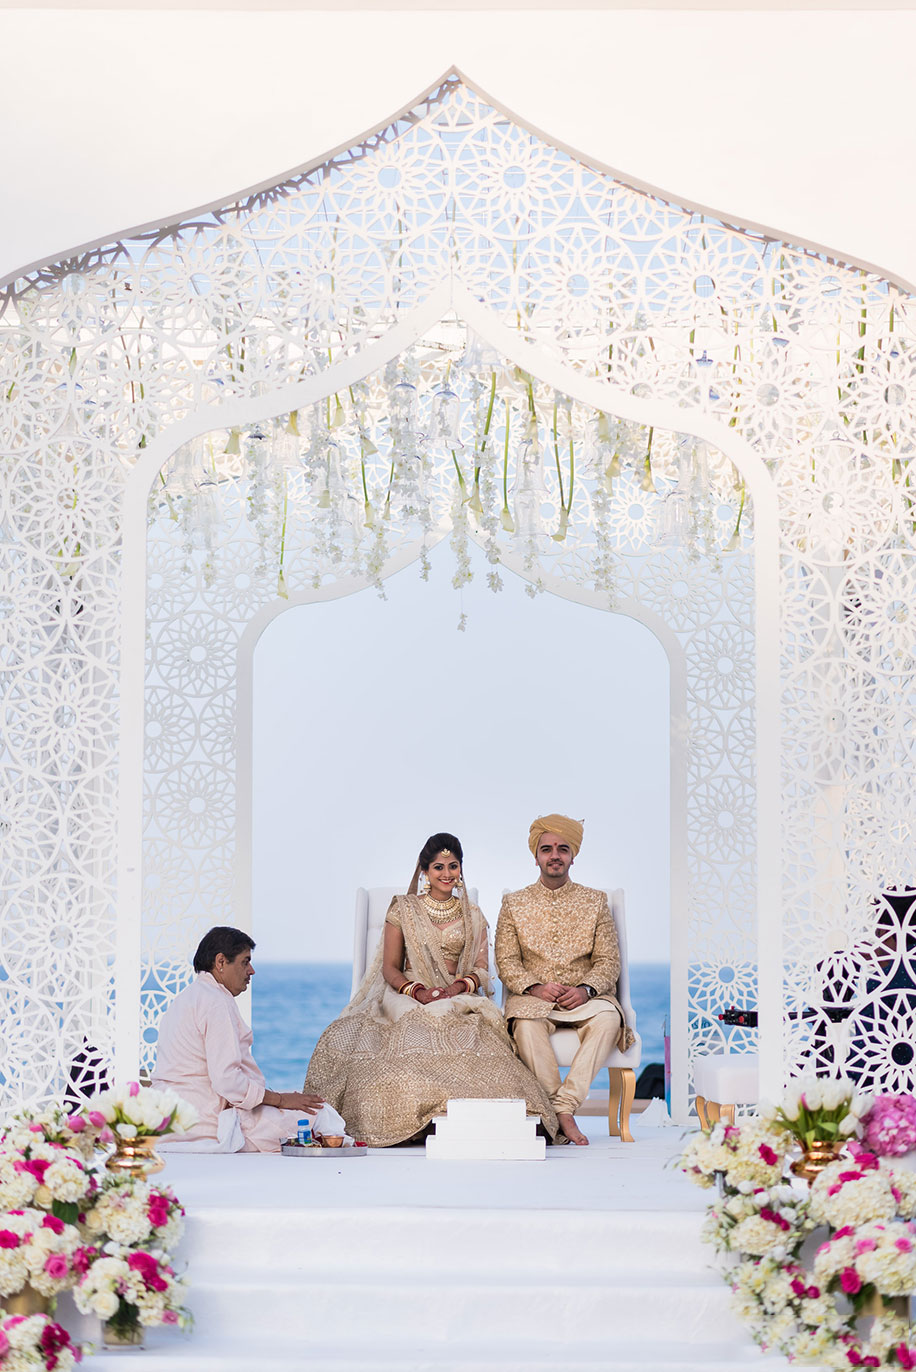 Oman as the Backdrop for Your Stunning Wedding Portraits